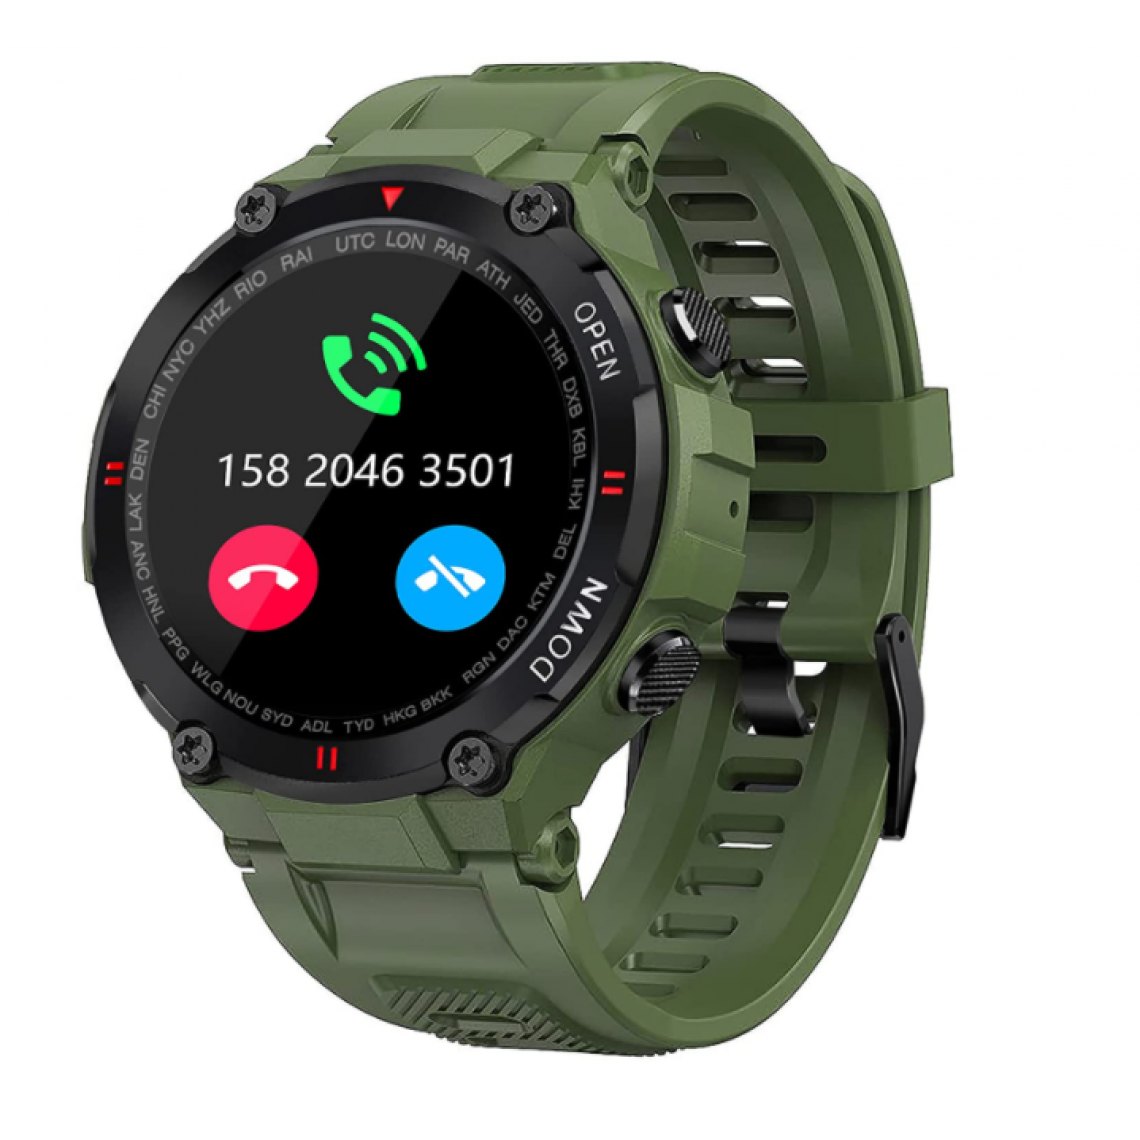 Chronotech Montres - Chronus Smart Watch for Men Outdoor Waterproof Tactical Smartwatch Bluetooth Dail Calls Speaker Fitness Tracker Watch Compatible with iPhone Samsung green - Montre connectée